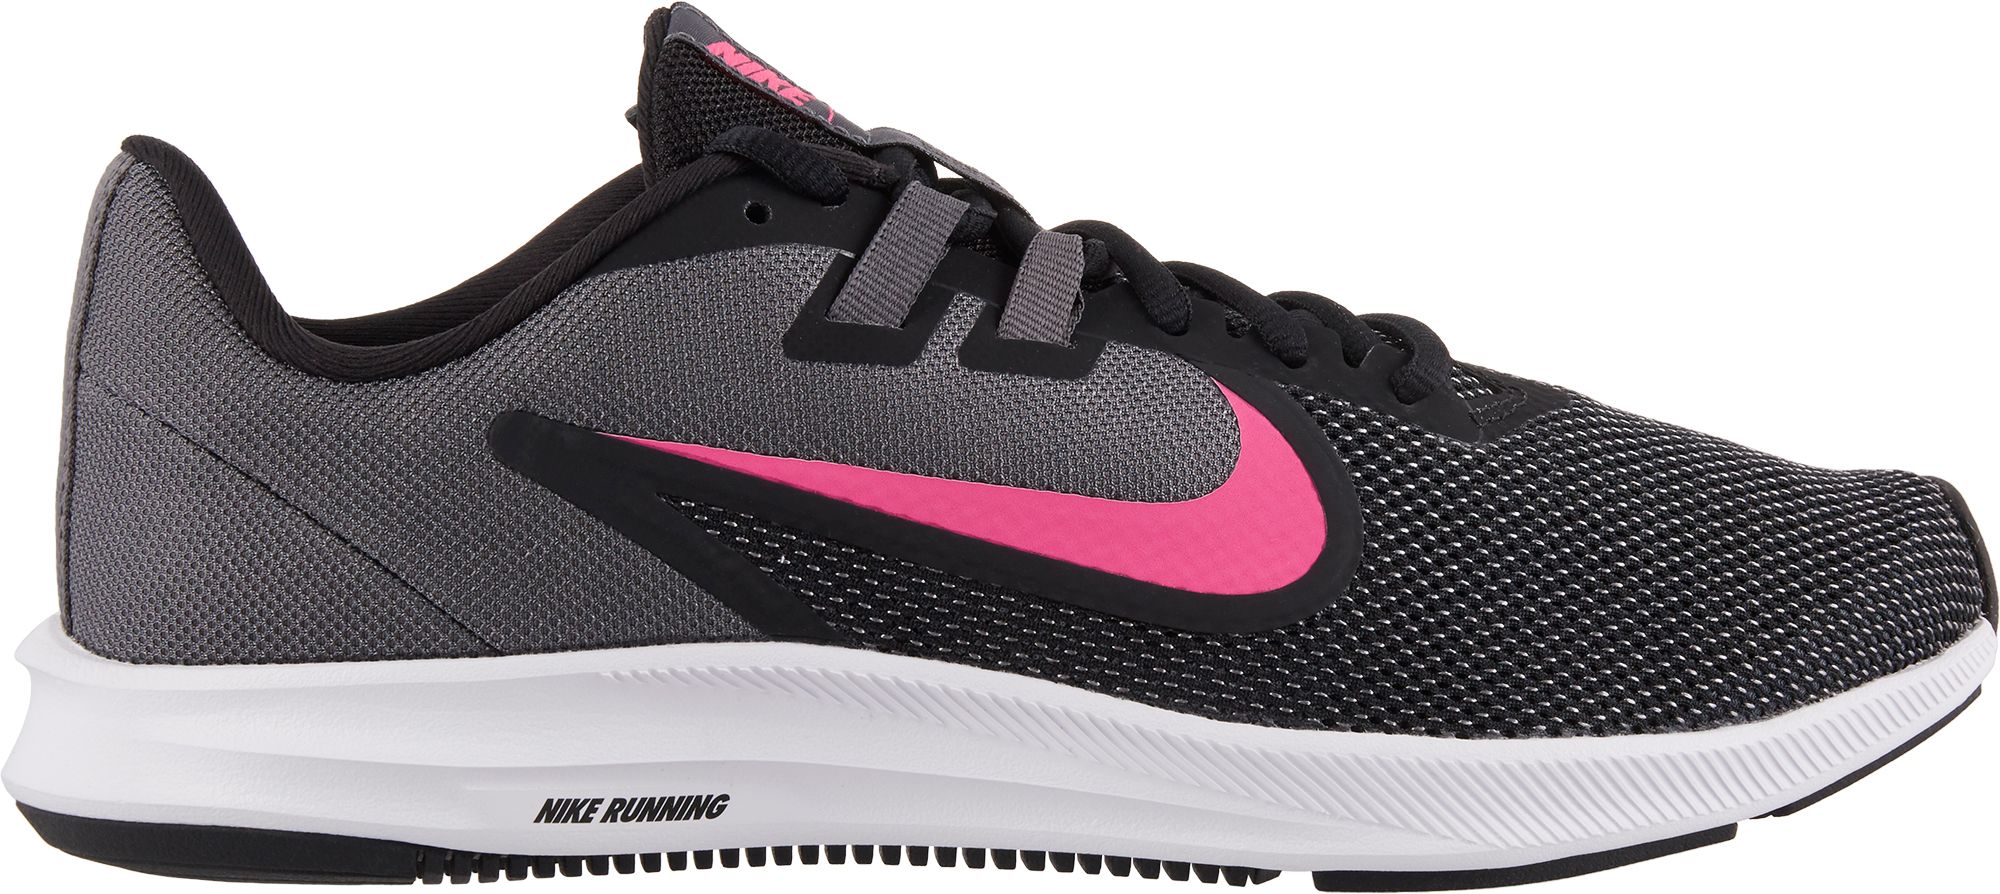 nike womens shoes pink and black